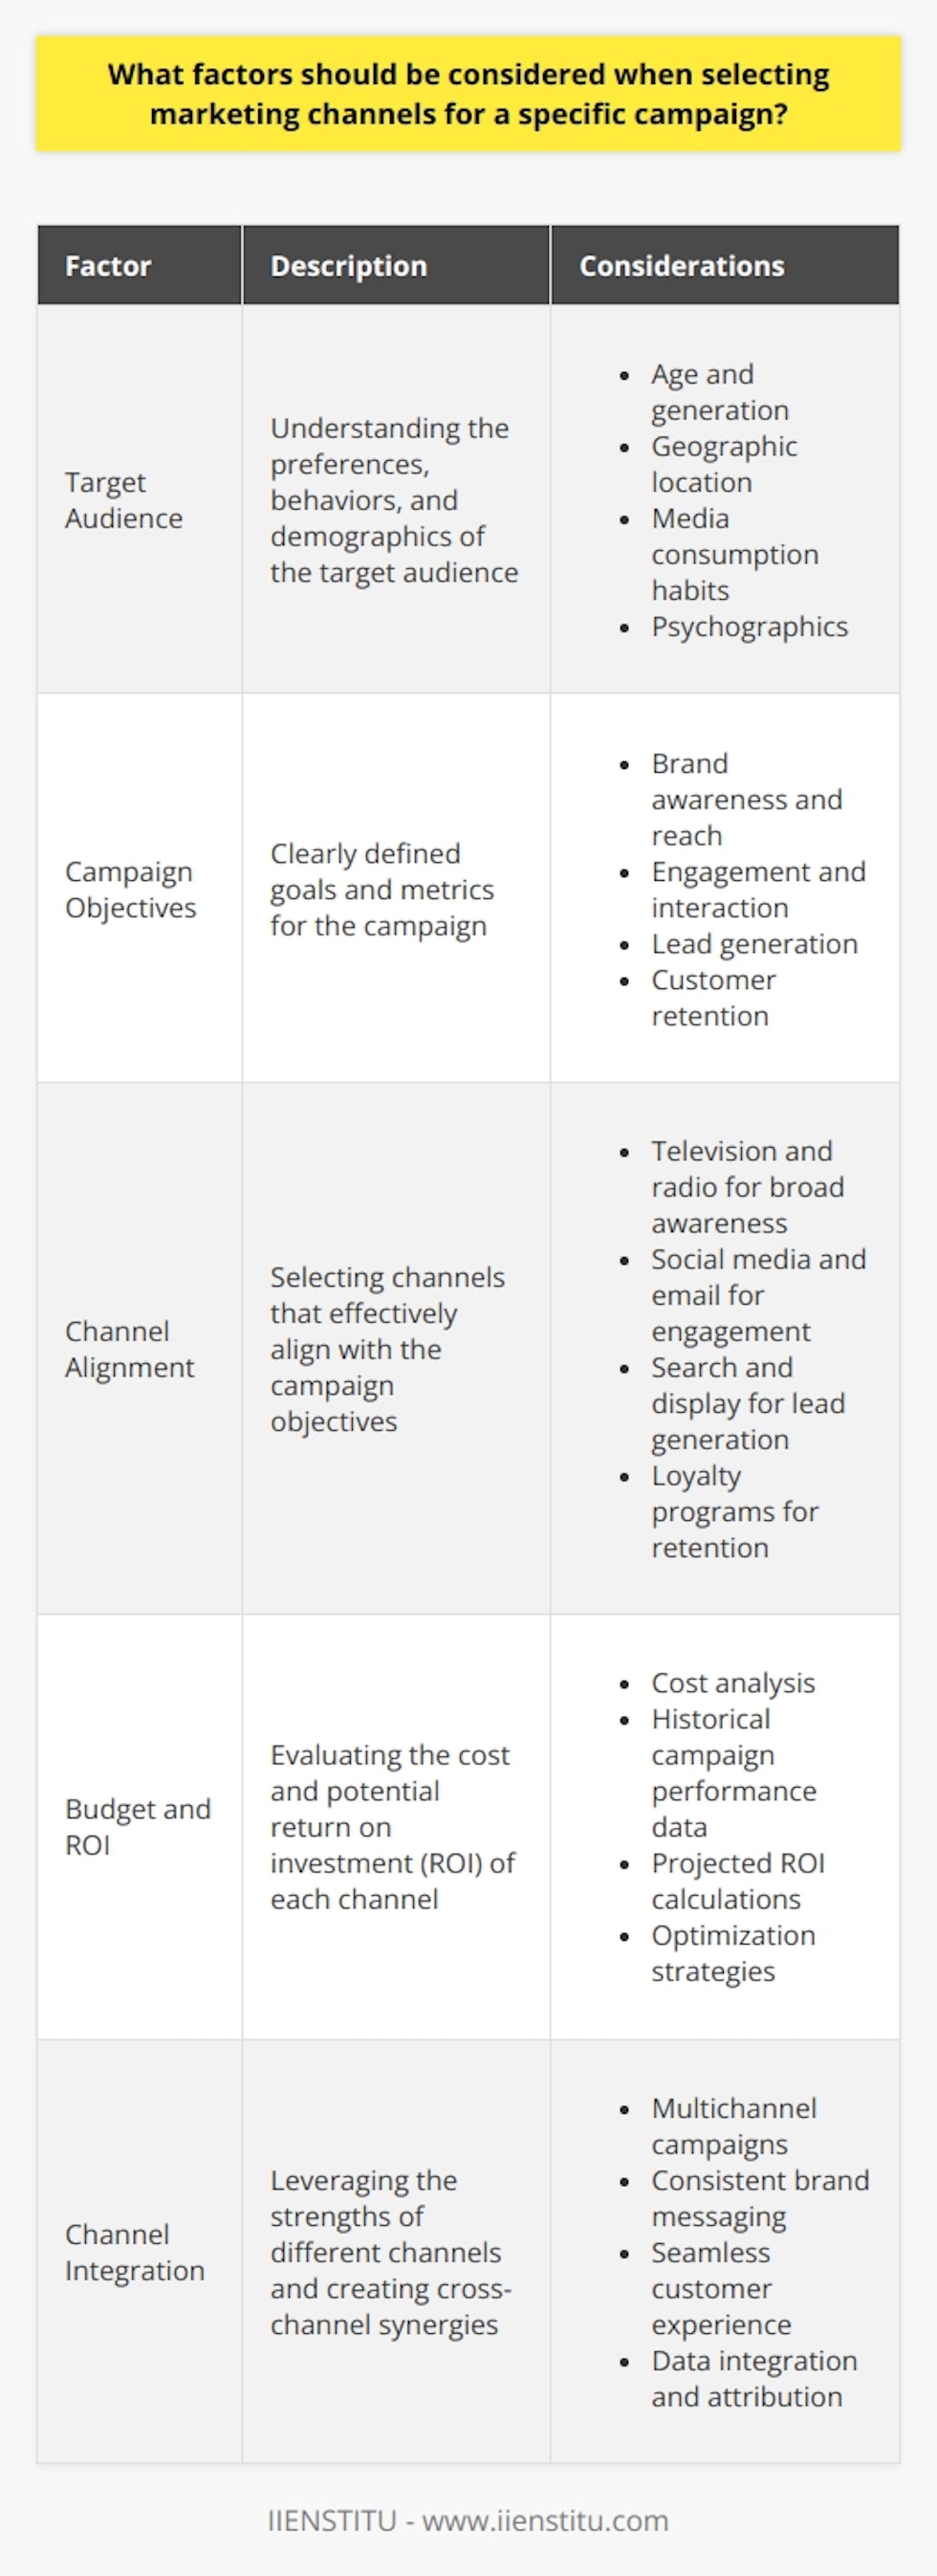 When selecting marketing channels for a specific campaign, several key factors should be taken into account. First, consider the target audience and their preferred communication channels. Understanding where your potential customers spend their time online and offline is crucial for effective channel selection. Additionally, evaluate the campaigns objectives and how well each channel aligns with those goals. Some channels may be better suited for brand awareness, while others excel at driving conversions. The budget allocated for the campaign is another significant factor in channel selection. Some channels, such as television advertising, can be expensive, while others, like social media, offer more affordable options. Its essential to balance the cost of each channel with its potential return on investment (ROI). Analyzing past campaign performance data can help inform budget decisions and channel prioritization. Audience Preferences and Behavior To effectively reach your target audience, consider their preferences and behavior when selecting marketing channels. Conduct market research to gather insights into your audiences demographics, psychographics, and media consumption habits. This information will help you identify the channels that are most likely to resonate with your target audience and drive engagement. Age and Generation Different age groups and generations may prefer different marketing channels. For example, younger audiences may be more responsive to social media and online video content, while older generations may favor traditional channels like print and television. Tailor your channel selection to align with the preferences of your target age group. Geographic Location The geographic location of your target audience can also influence channel selection. Some channels may have stronger penetration in certain regions or countries. Consider the local media landscape and cultural differences when choosing channels for a global campaign. Campaign Objectives and Metrics Clearly define the objectives of your marketing campaign and select channels that align with those goals. Different channels excel at achieving specific objectives, such as brand awareness, lead generation, or customer retention. Identify the key performance indicators (KPIs) that will be used to measure the success of your campaign and choose channels that can effectively deliver on those metrics. Awareness and Reach If the primary objective of your campaign is to increase brand awareness and reach a wide audience, channels like television, radio, and online display advertising may be effective. These channels offer broad exposure and can help introduce your brand to new potential customers. Engagement and Interaction For campaigns focused on engagement and interaction, channels like social media, email marketing, and content marketing can be valuable. These channels allow for two-way communication and provide opportunities for your audience to engage with your brand on a deeper level. Integration and Cross-Channel Synergy Consider how different marketing channels can work together to create a cohesive and integrated campaign experience. Look for opportunities to leverage the strengths of each channel and create cross-channel synergies. For example, a social media campaign can drive traffic to a landing page, which can then encourage email sign-ups for future nurturing. Conclusion Selecting the right marketing channels for a specific campaign requires careful consideration of multiple factors. By understanding your target audience, aligning channels with campaign objectives, and leveraging cross-channel synergies, you can develop an effective channel strategy that maximizes ROI and achieves your marketing goals.